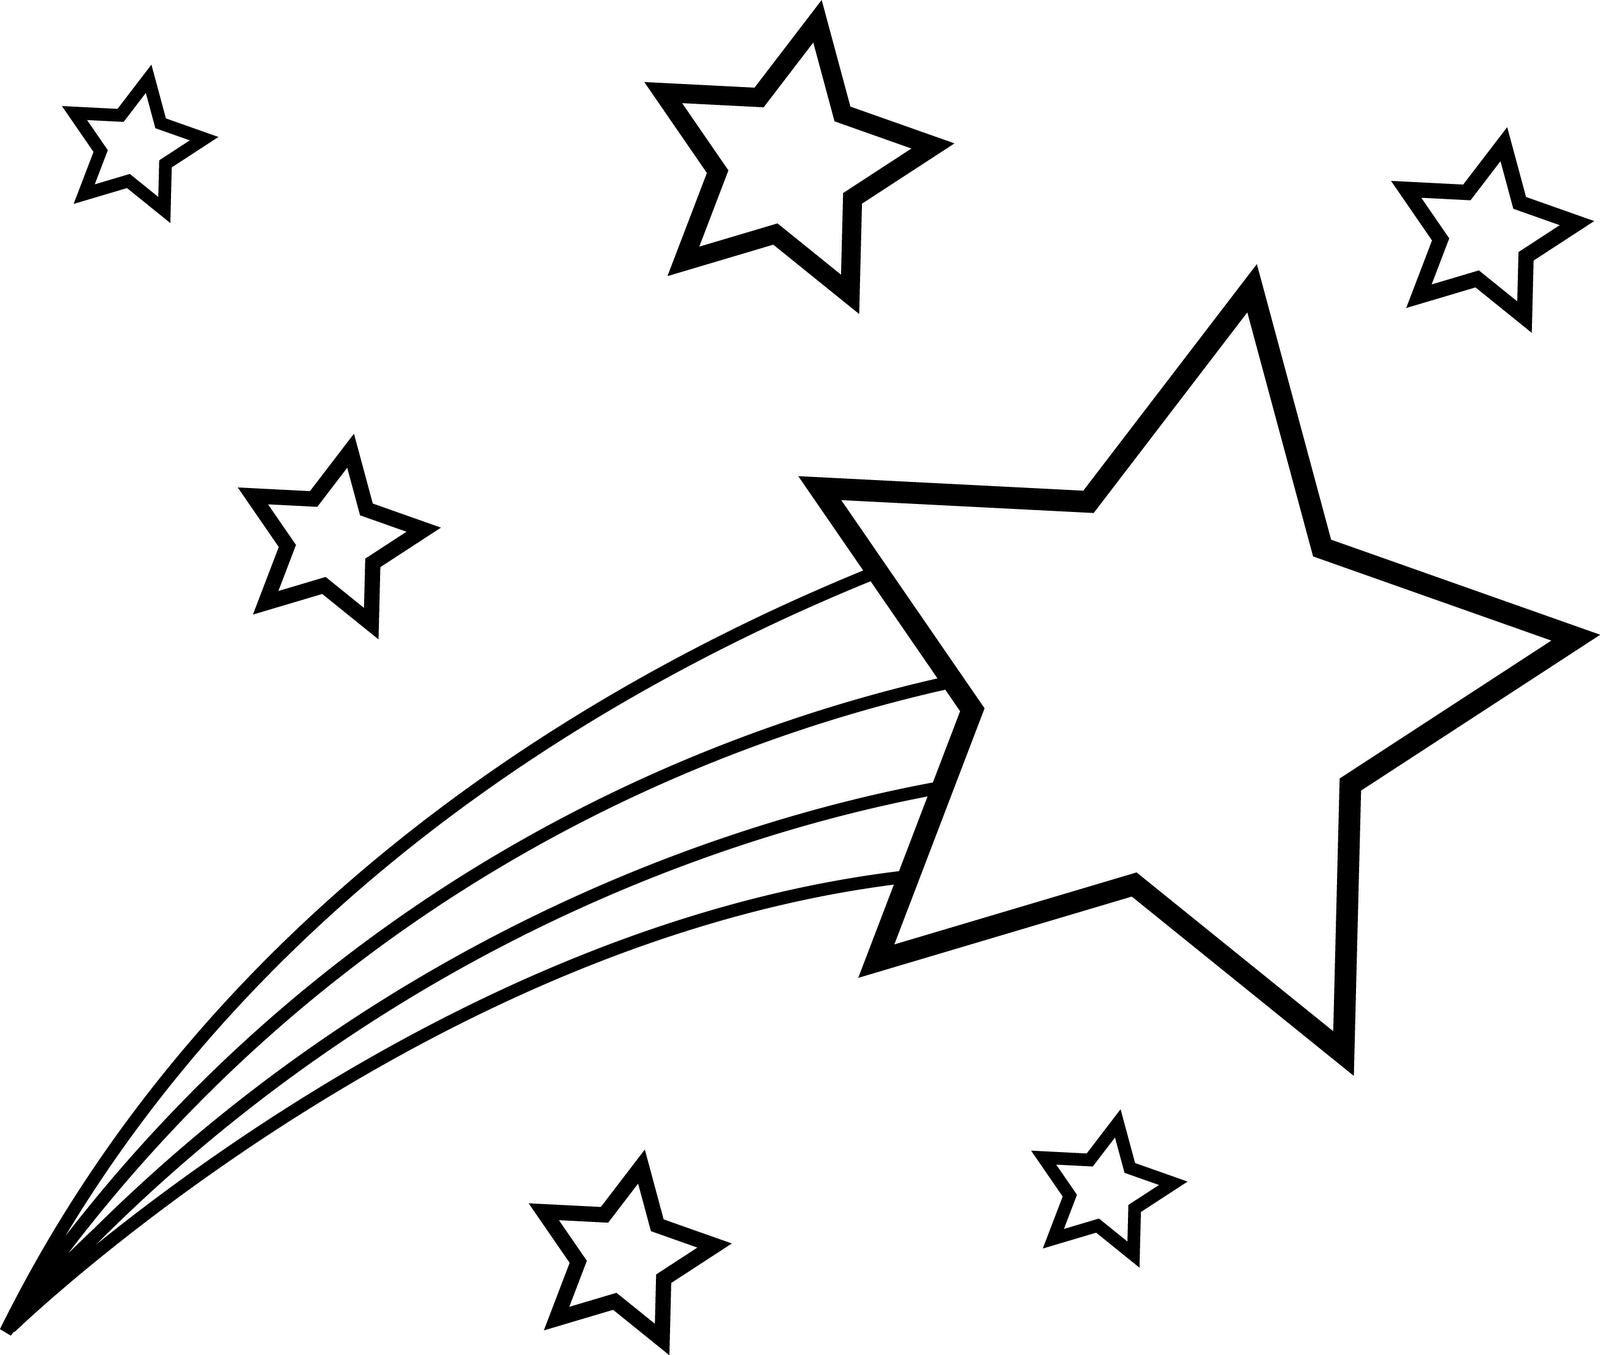 Shooting Star Clip Art Outline   Clipart Panda   Free Clipart Images